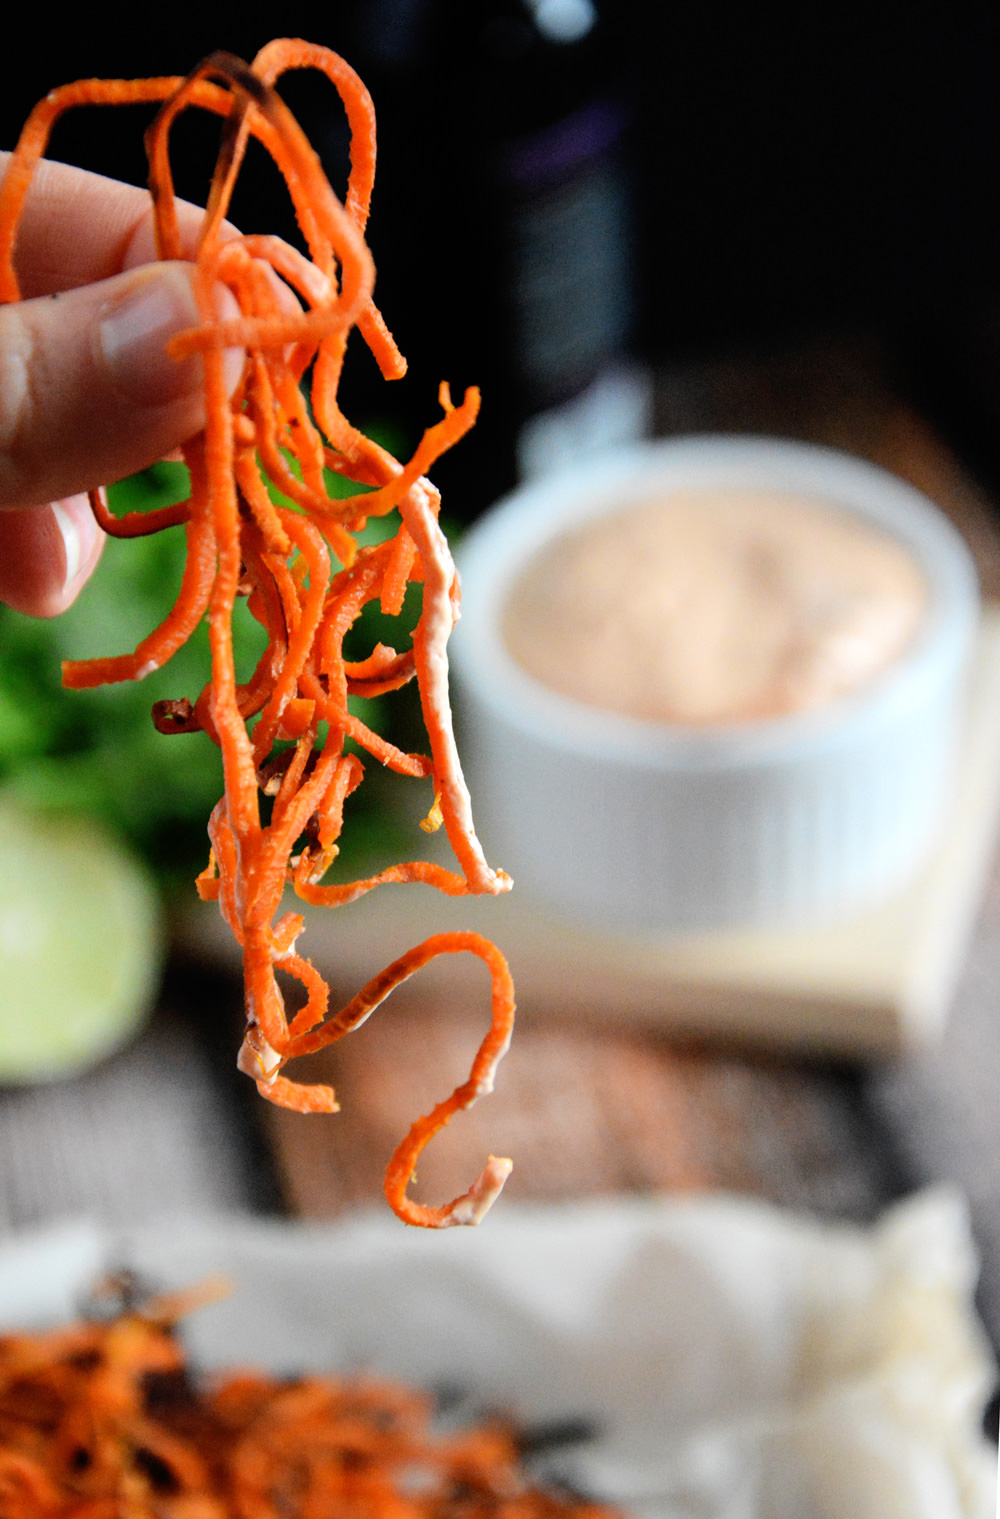 Homemade Sweet Potato Curly Fries with Chipotle Lime Aioli are a healthier spin off the classic sweet potato fry. Crispy, sweet, spicy and irresistible! #paleo #healthier #spiralized #fries